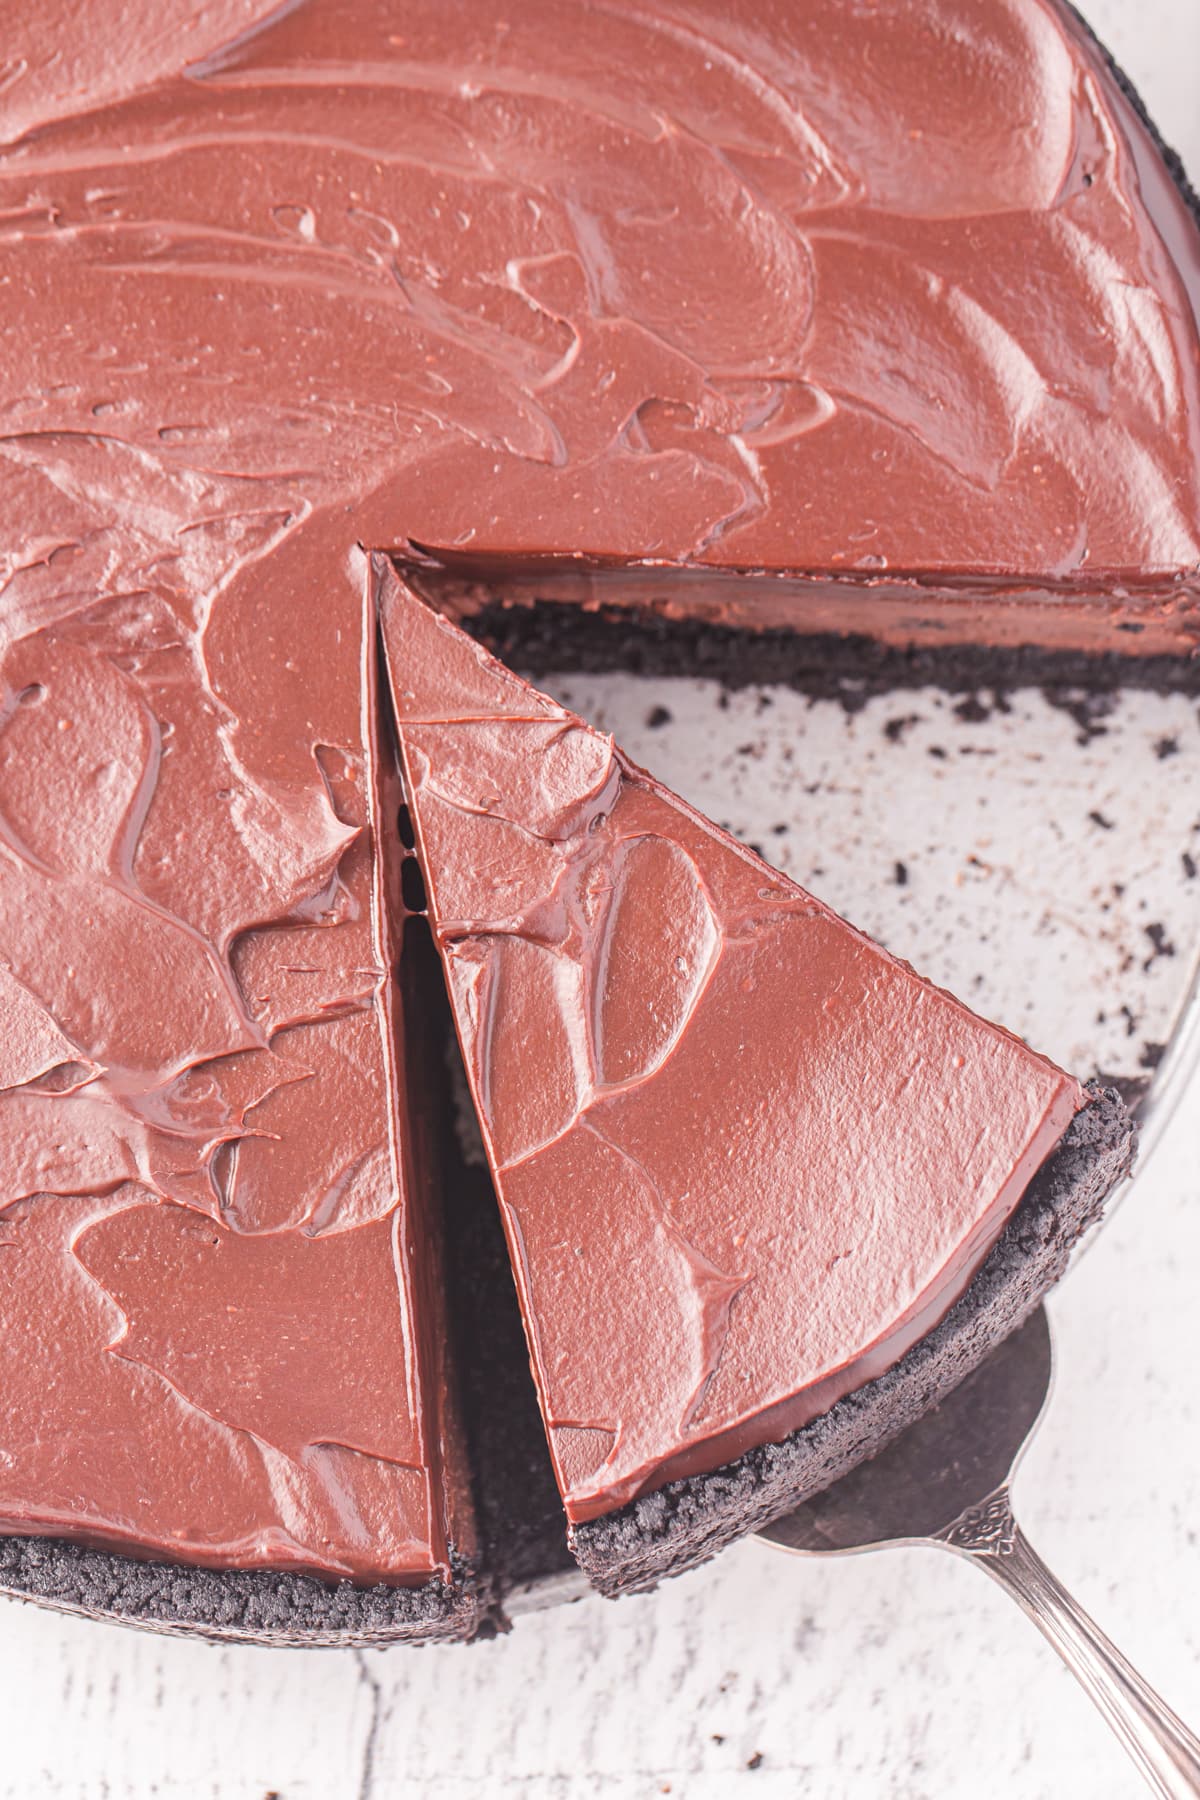 Over head shot of a chocolate cheesecake on a white plate.